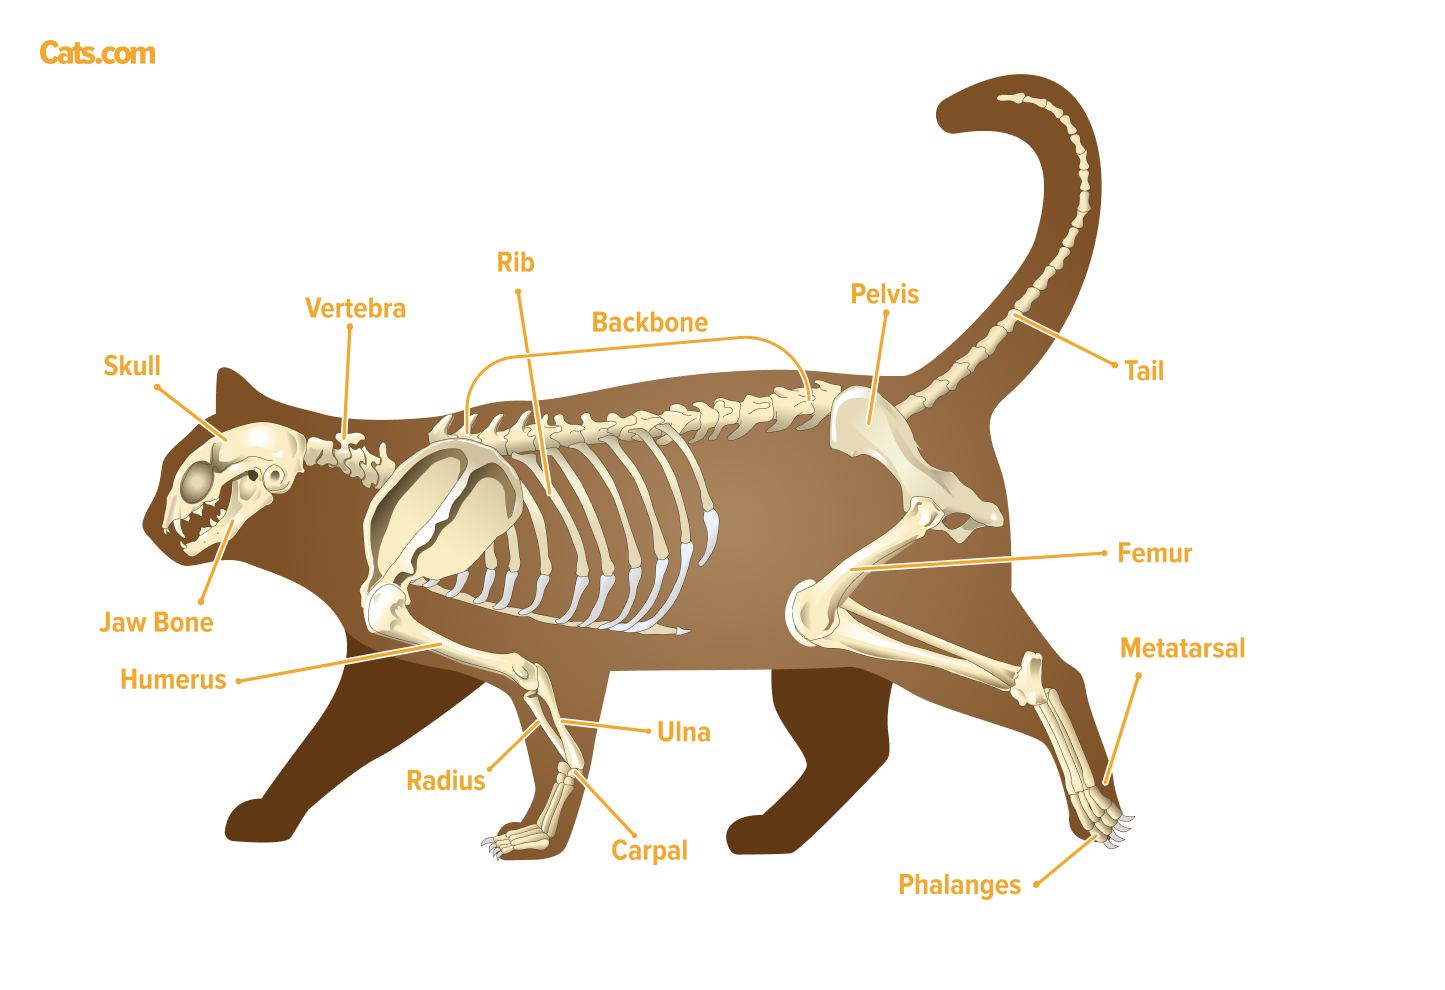 Your cat's tail is part of their skeletal anatomy, accounting for 10% of all the bones in the body!